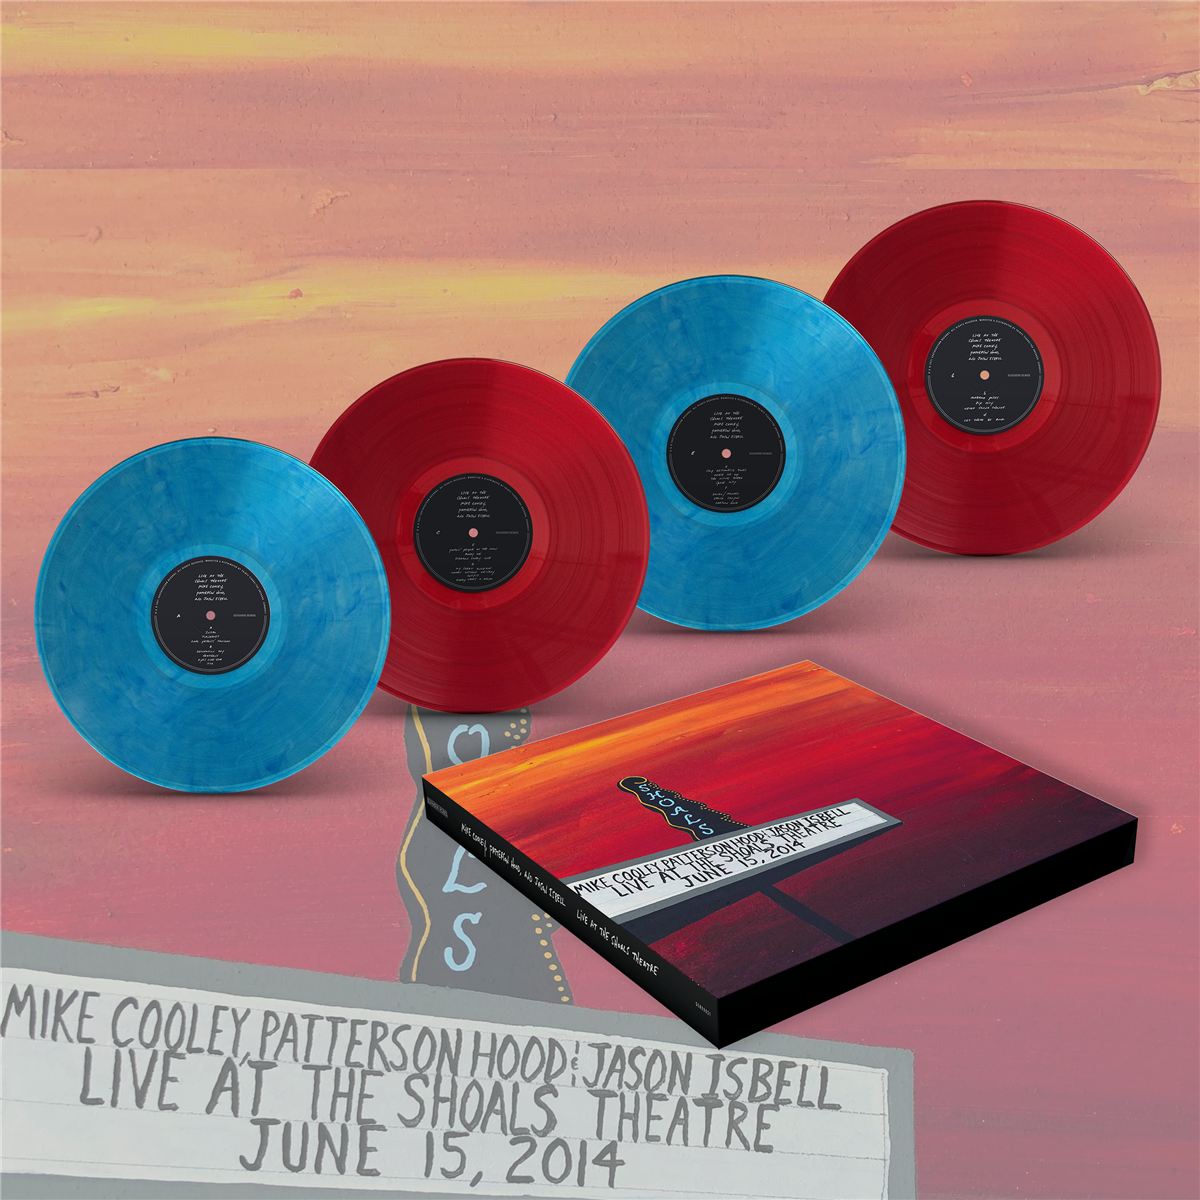 Mike Cooley, Patterson Hood, and Jason Isbell - Live at the Shoals Theatre (Translucent Blue and Red Vinyl Box Set)